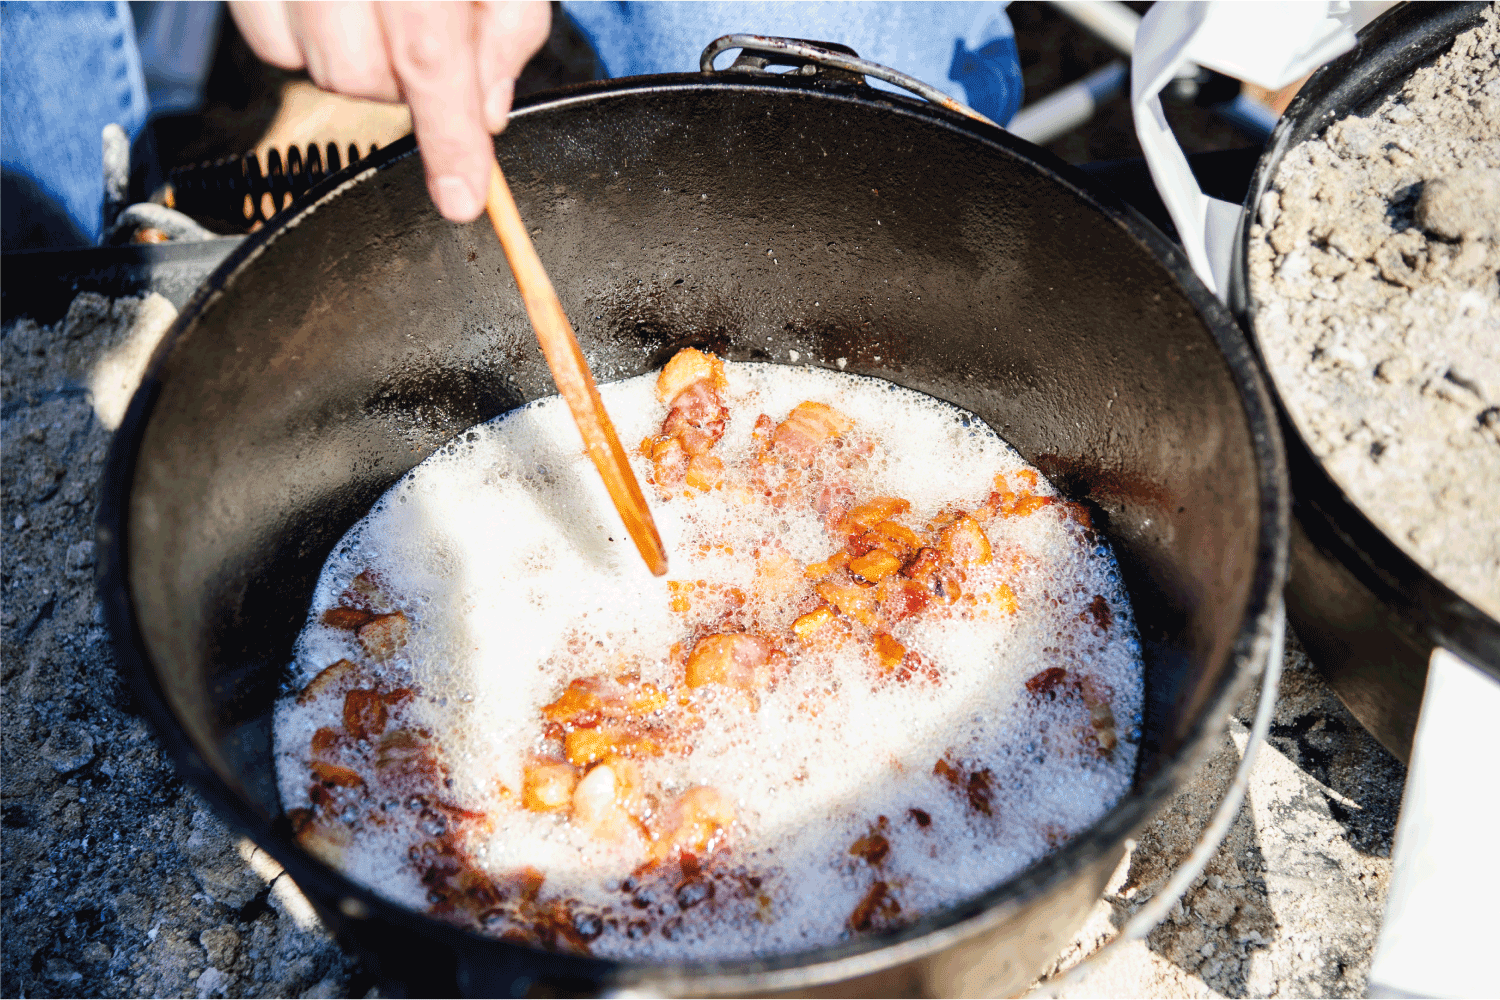 A dutch oven containing bacon frying in its grease.